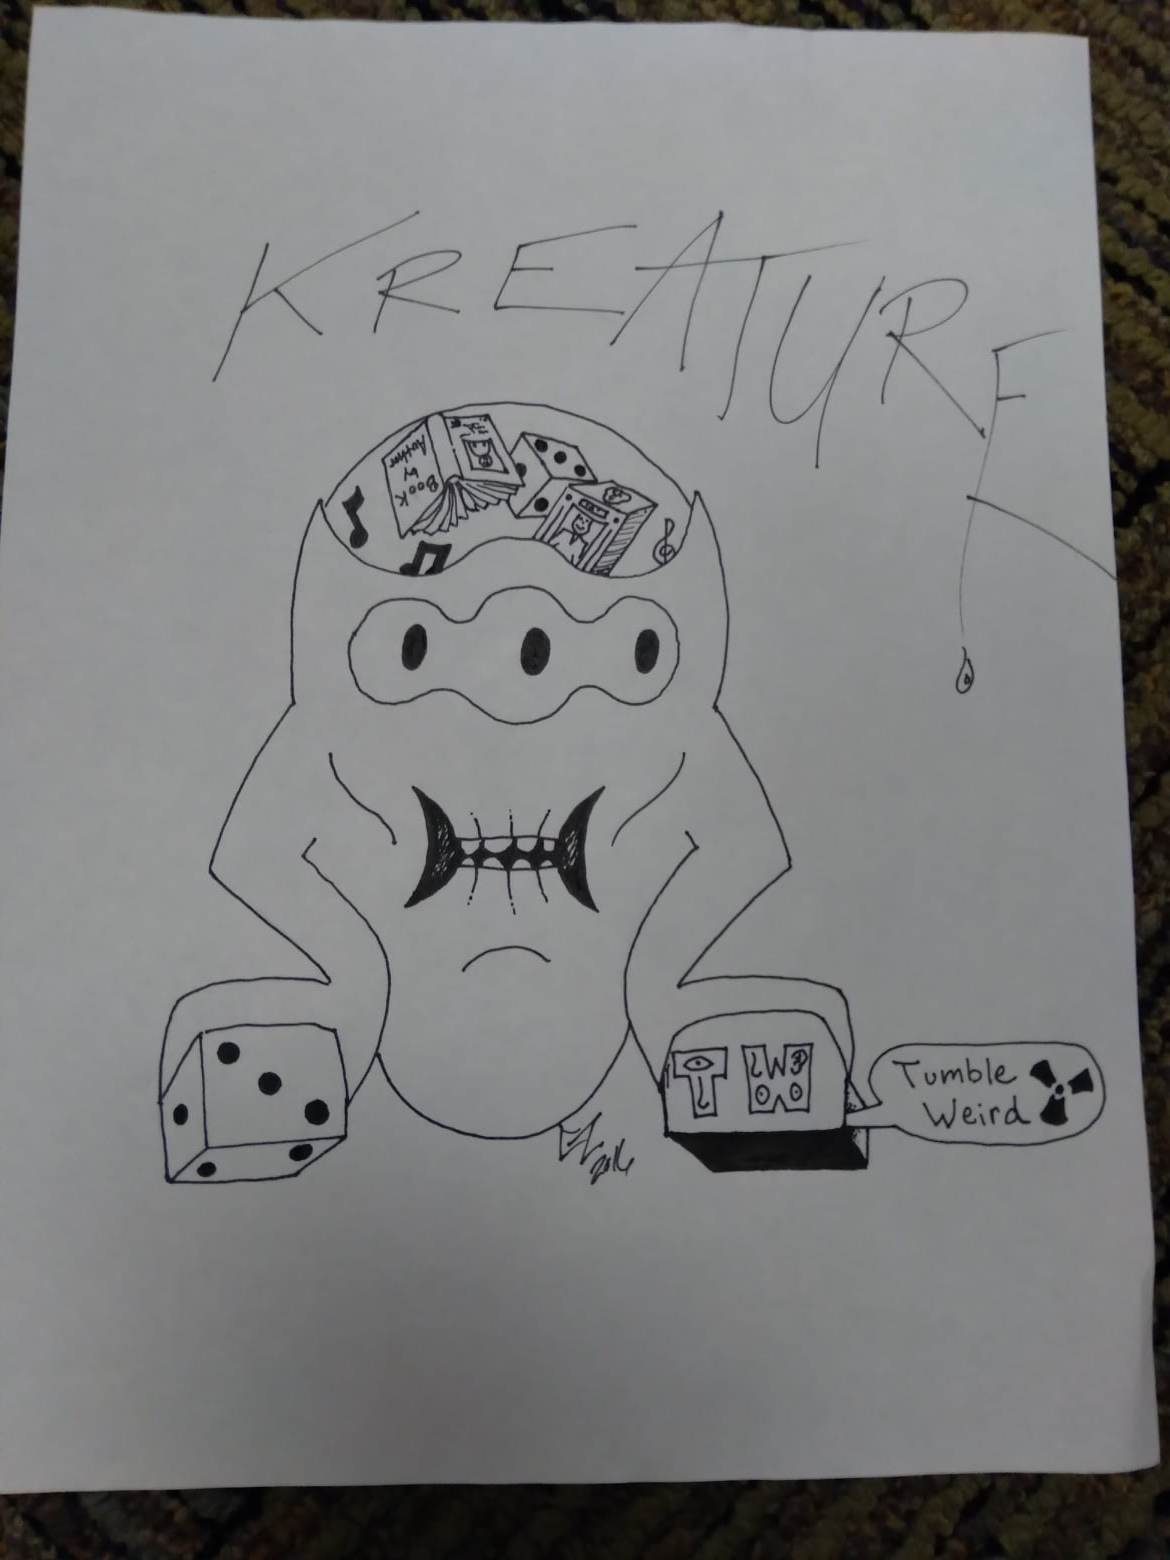 Drawing of a three eyed creature with text reading "tumbleweird".